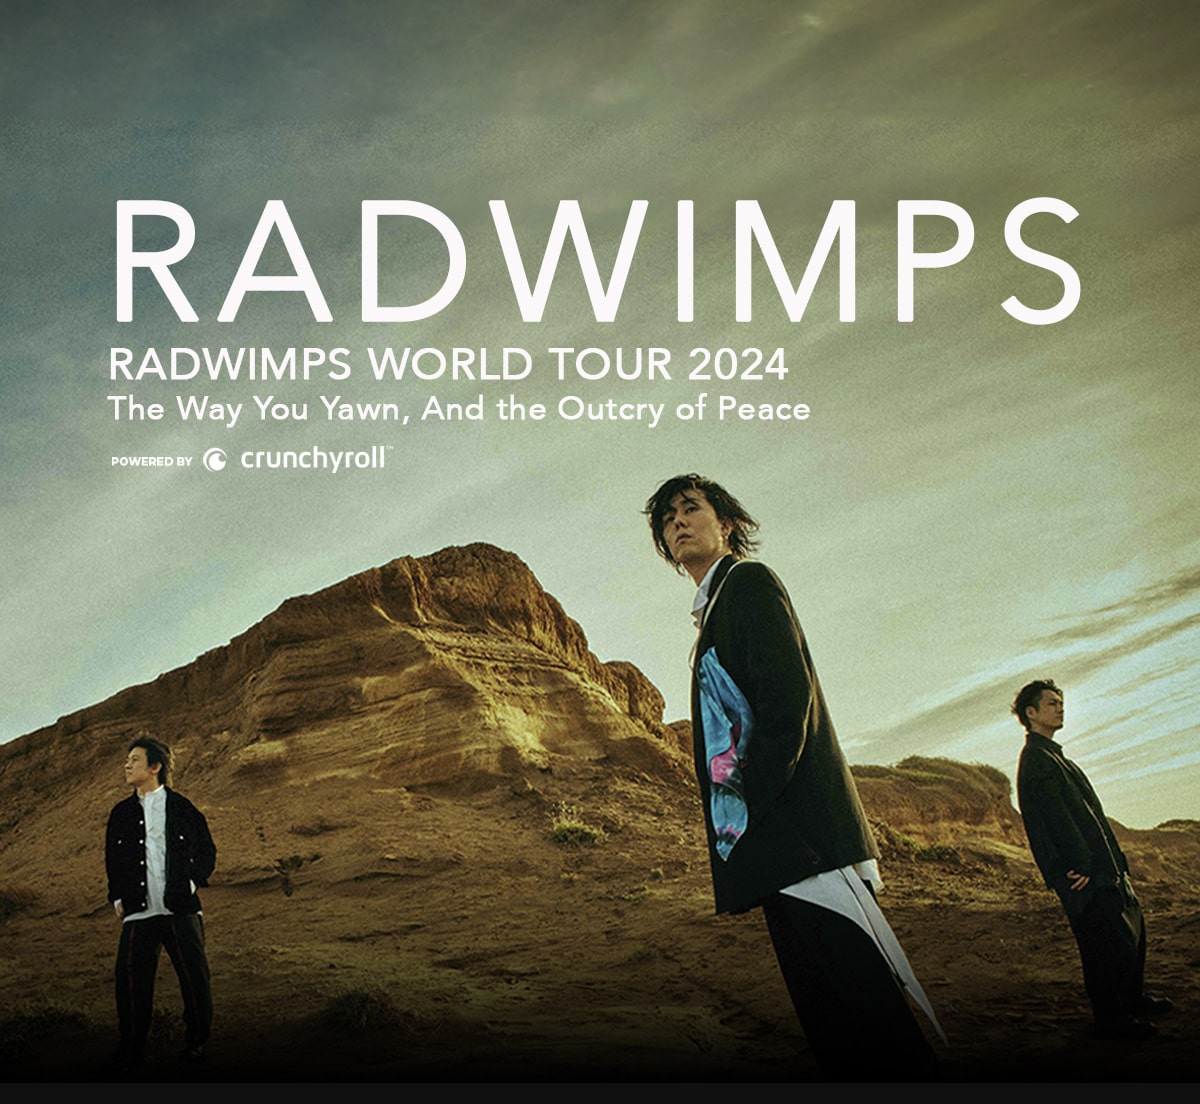 Radwimps World Tour 2024 'The Way You Yawn, And the Outcry of Peace